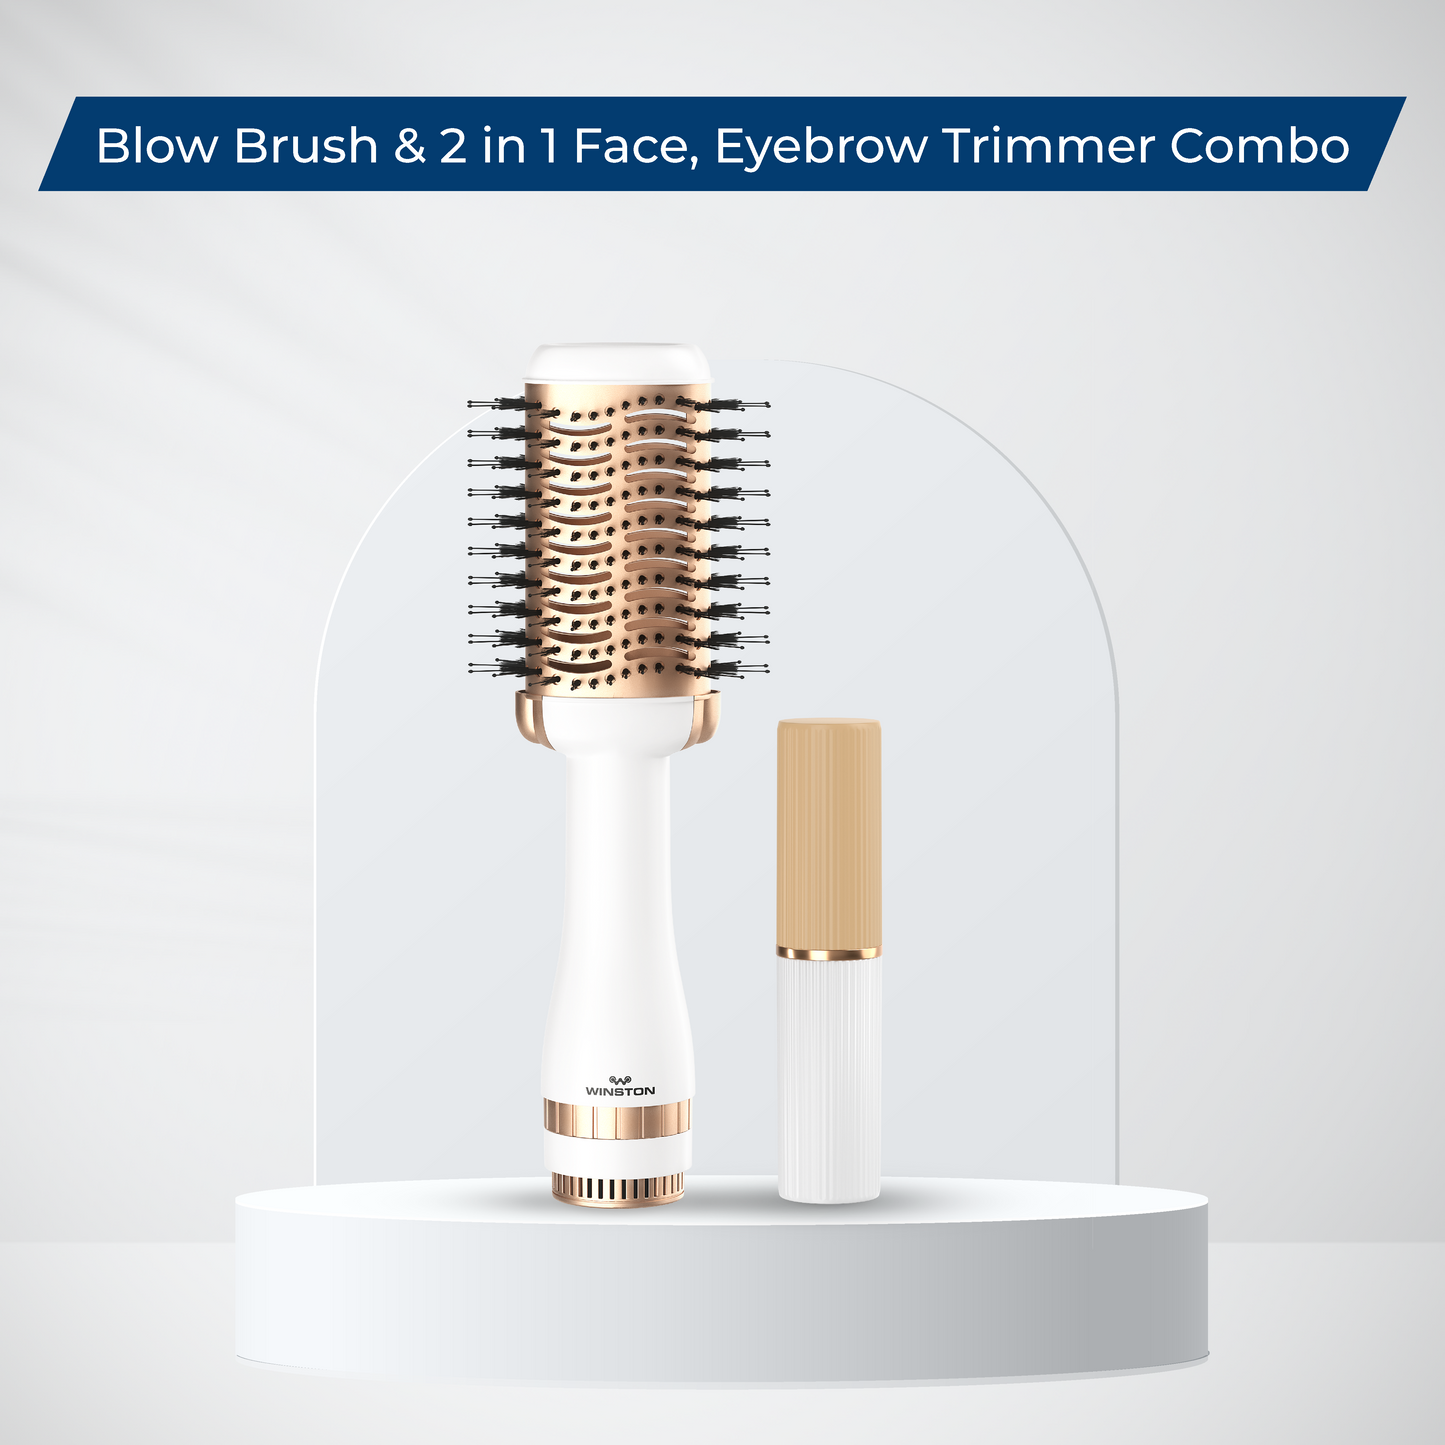 Blow Brush & 2 in 1 Face, Eyebrow Trimmer Combo